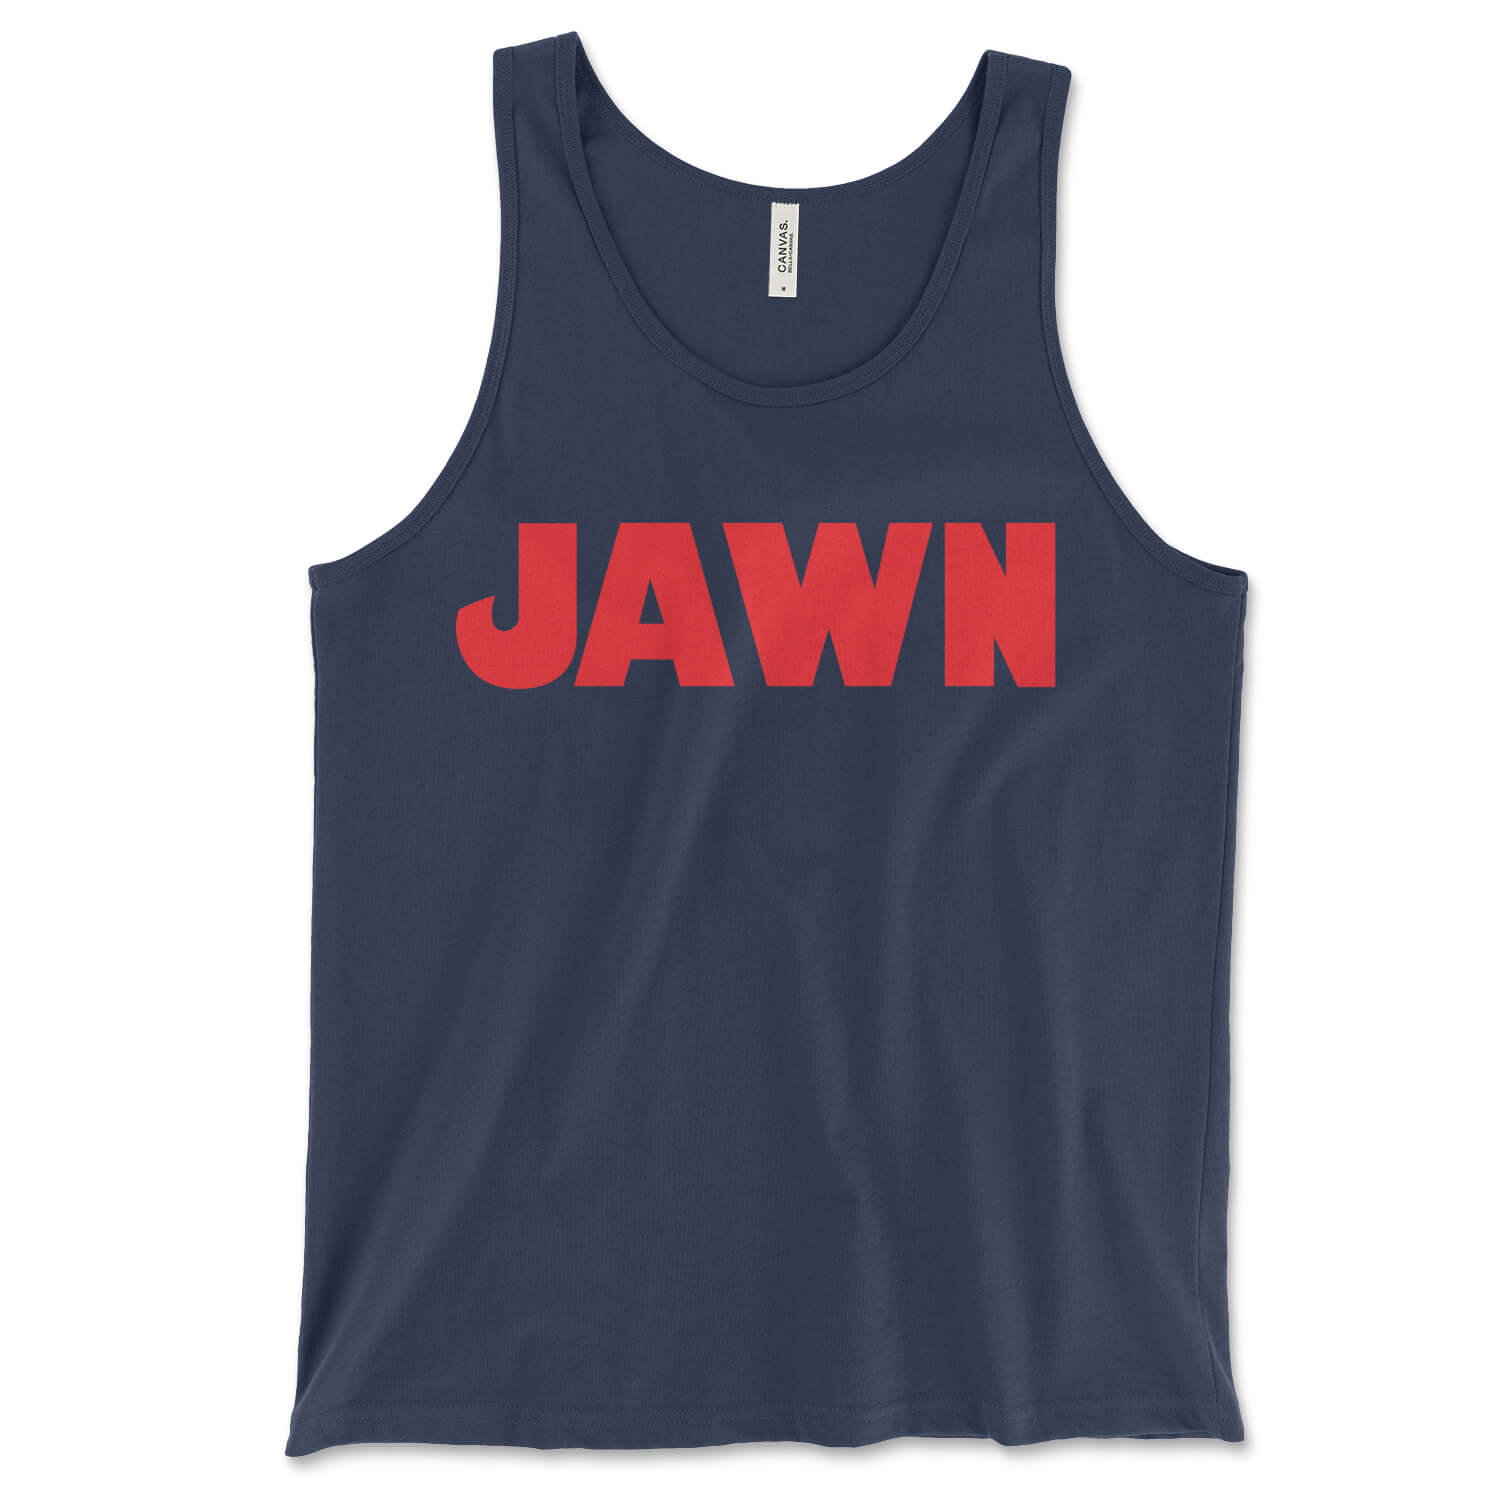 Philadelphia Philly jawn jaws navy blue tank top from Phillygoat